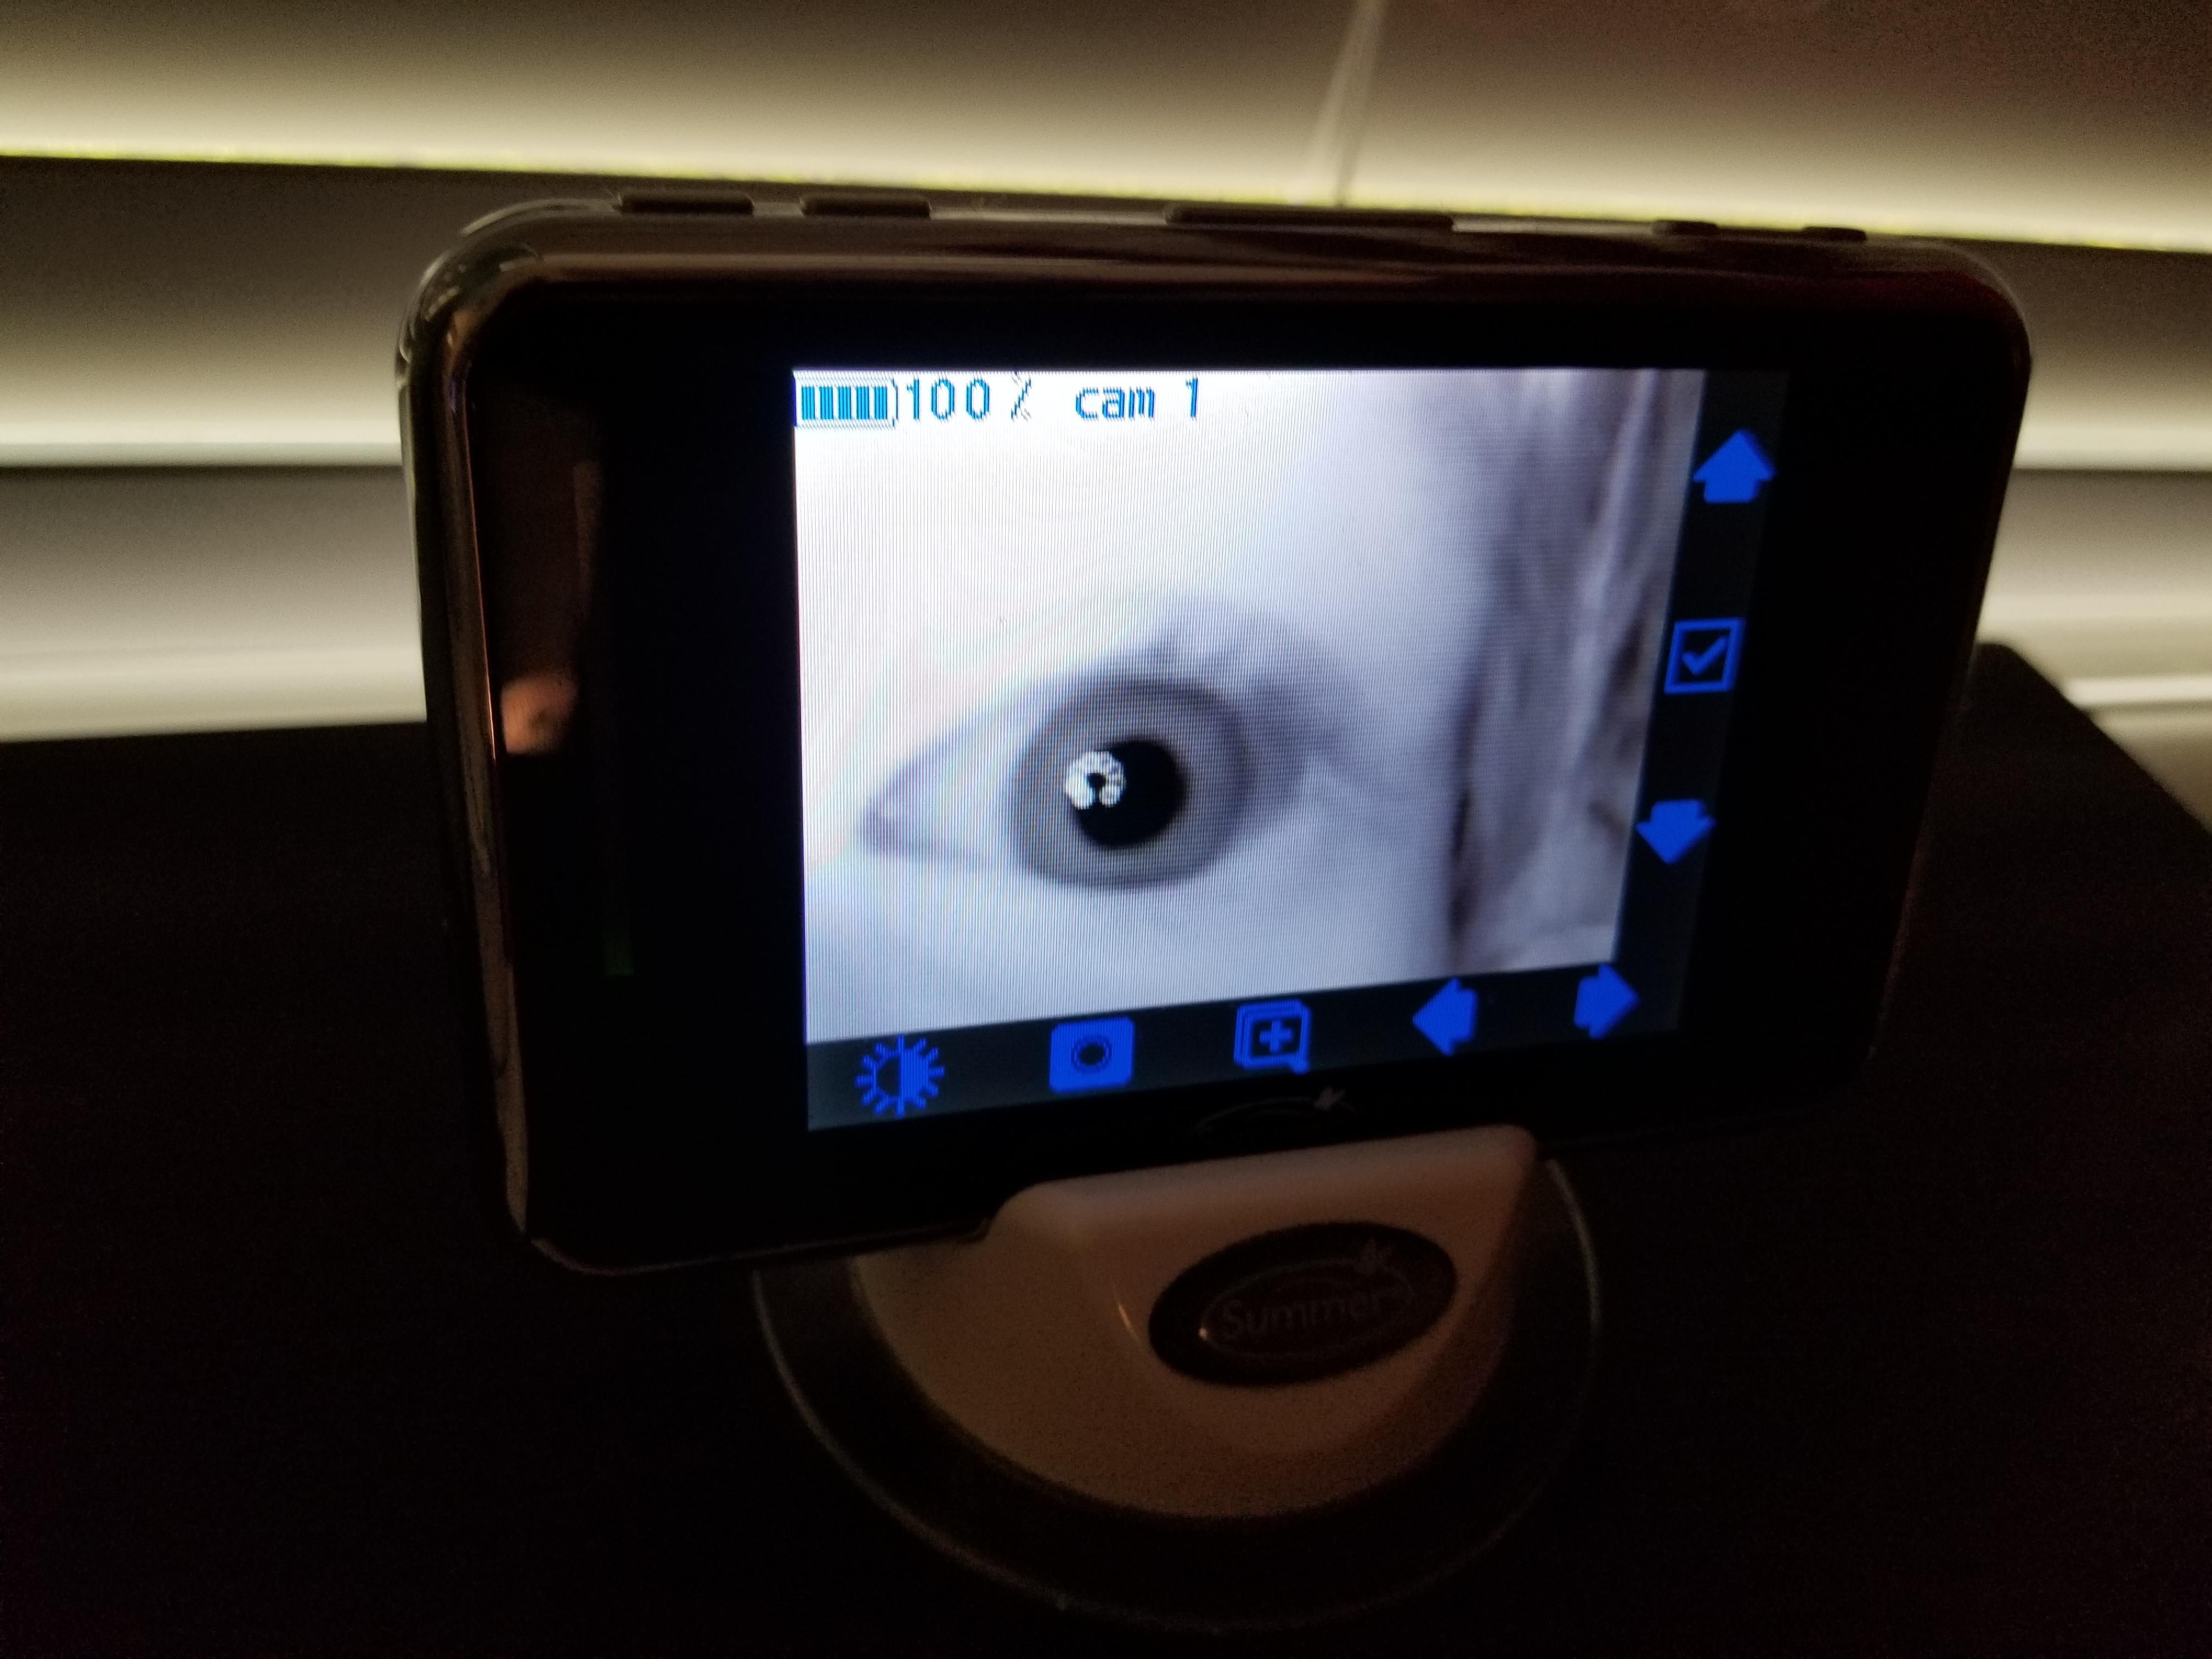 Think my daughter found her baby monitor..